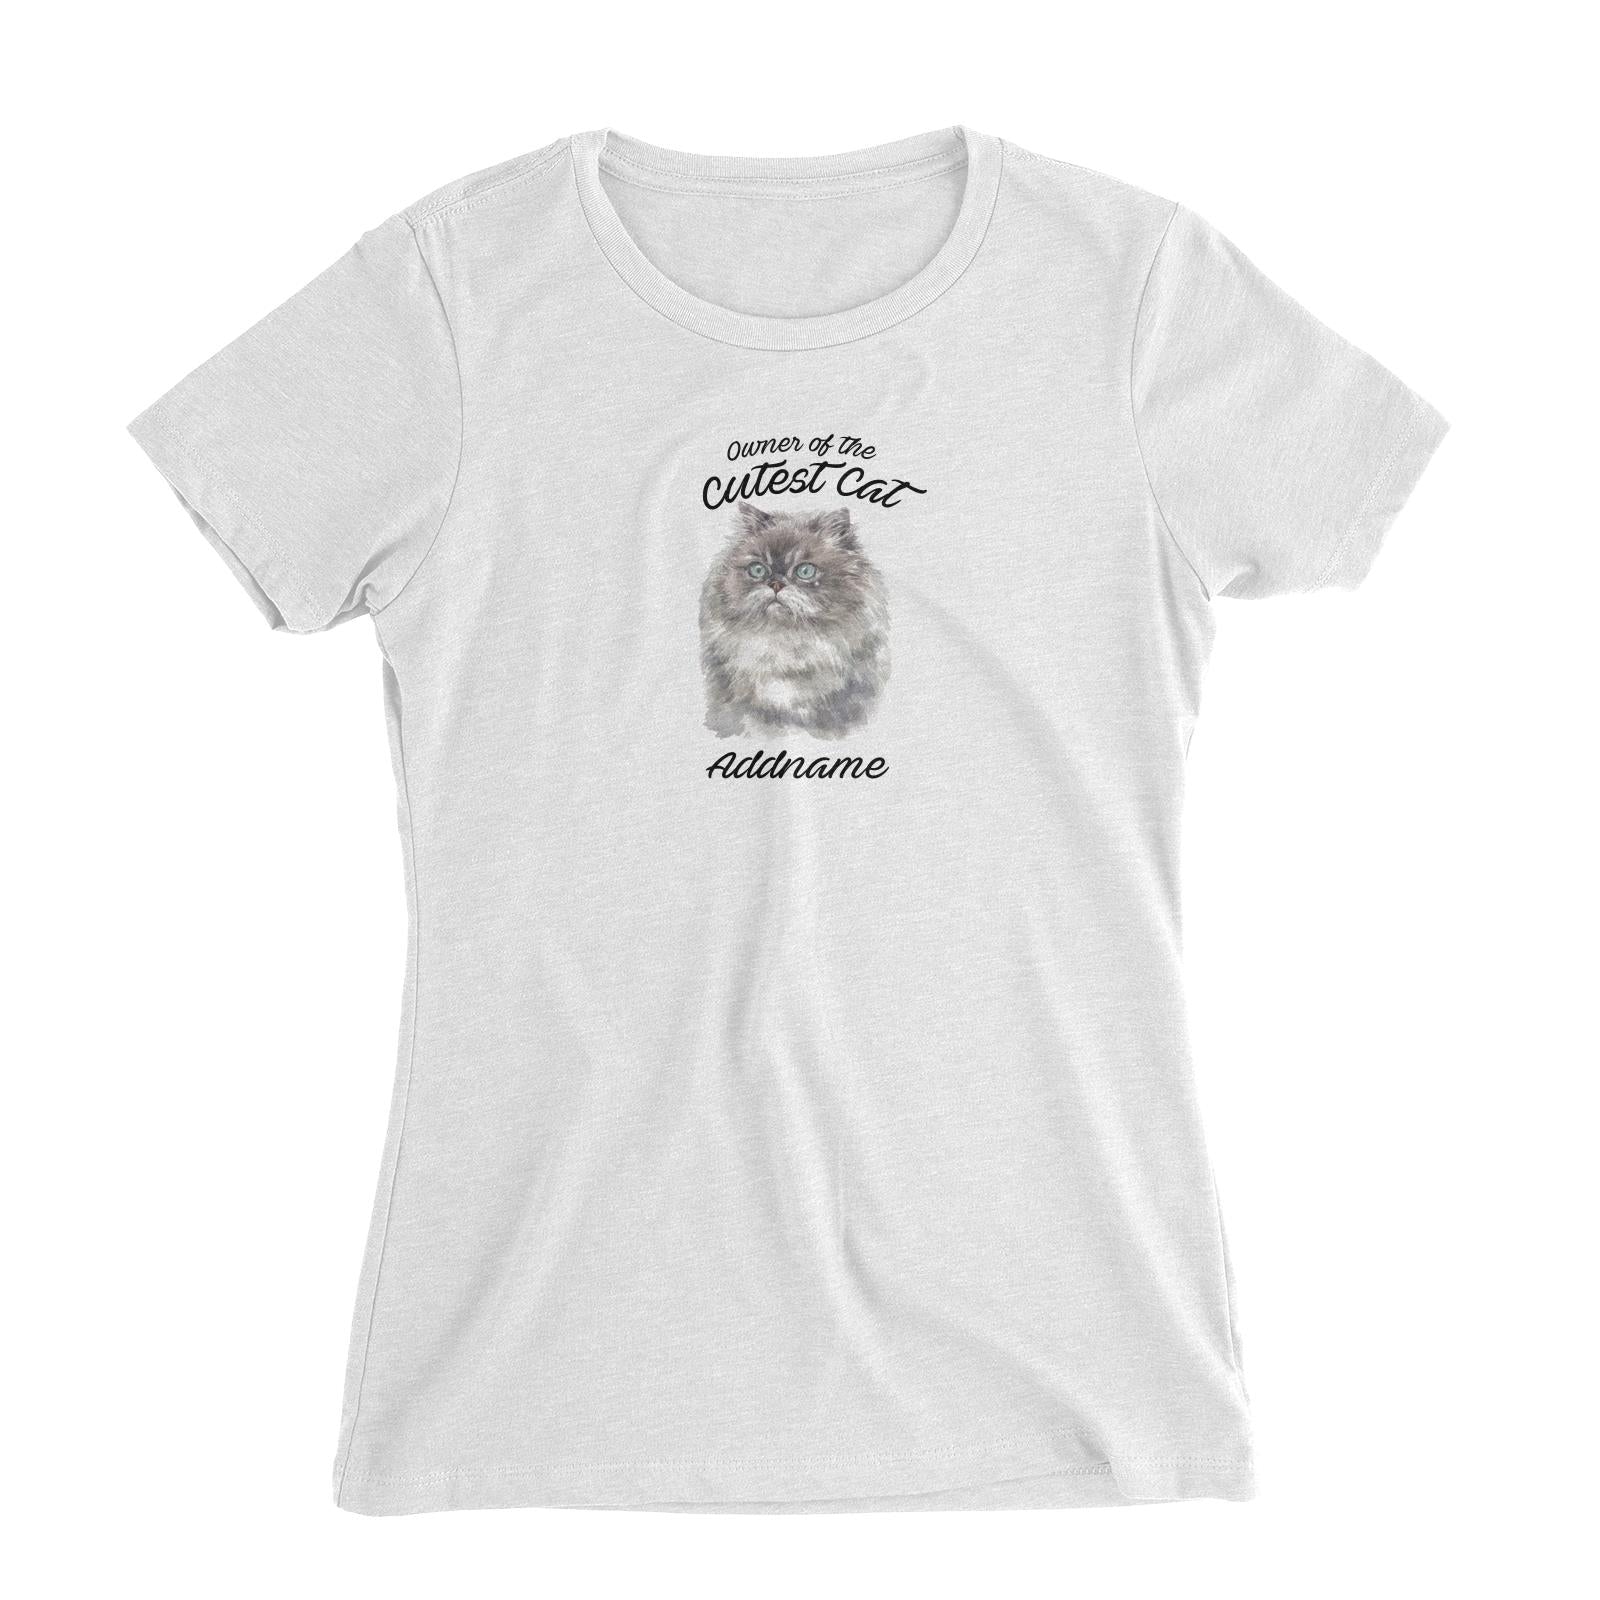 Watercolor Owner Of The Cutest Cat Himalayan Addname Women's Slim Fit T-Shirt